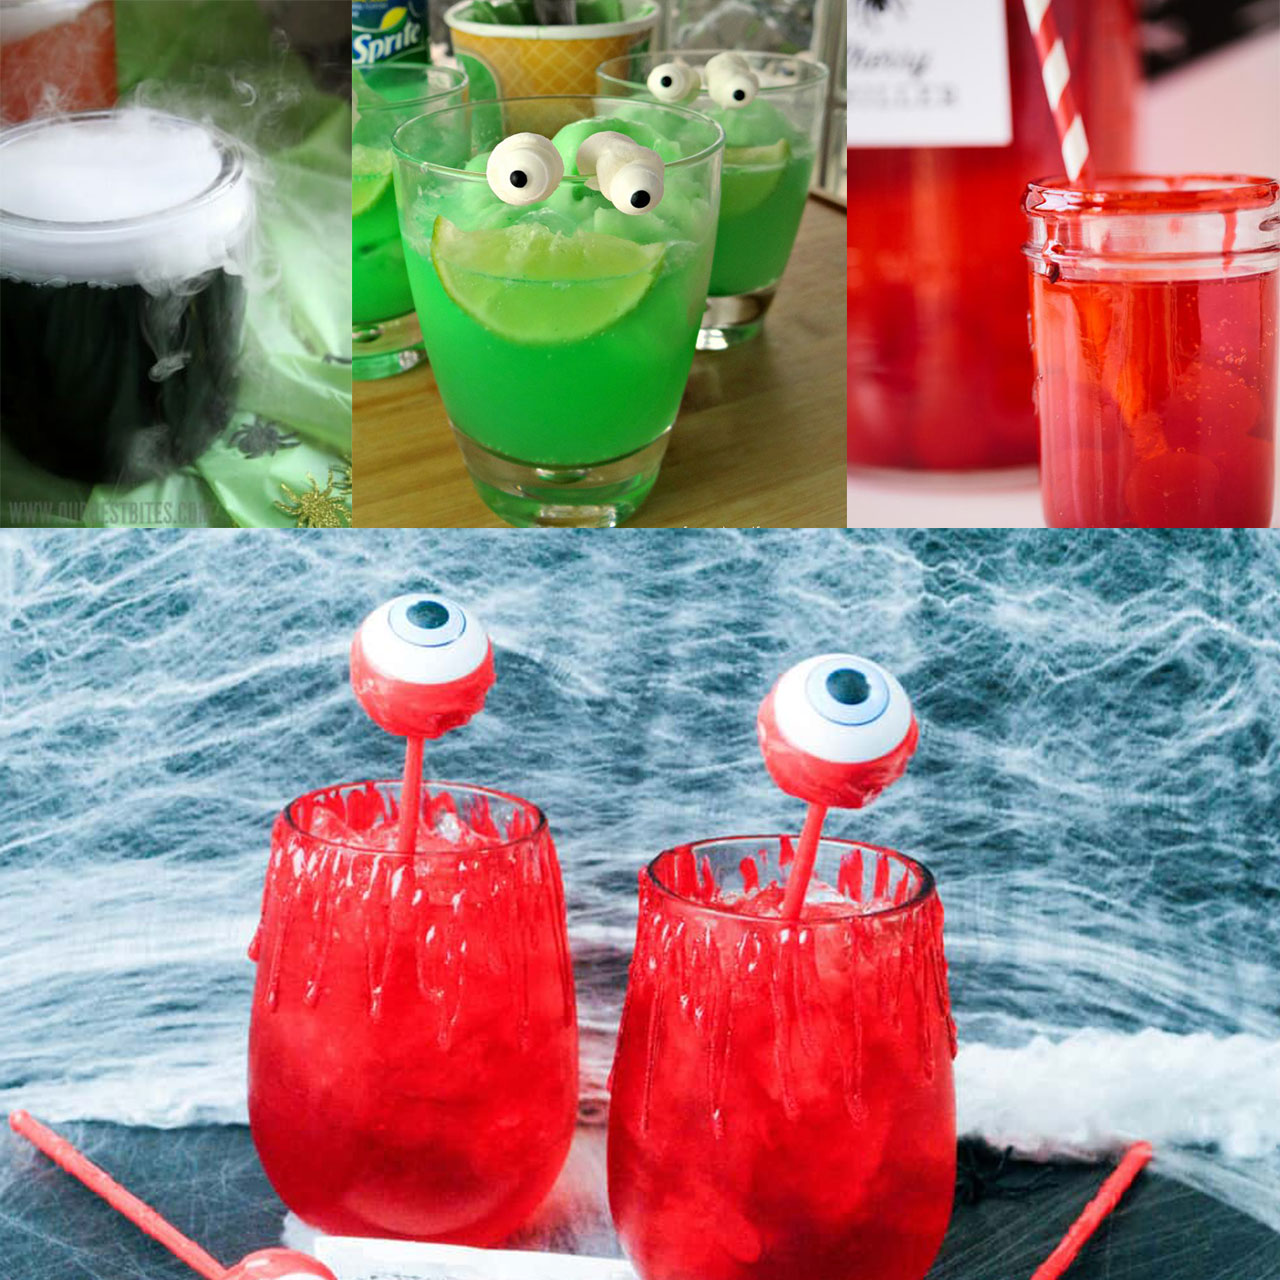 10+ Spooky drinks recipes ideas for Halloween parties. Non-alcoholic and so much fun! Funny Halloween Drinks ideas for Kids.